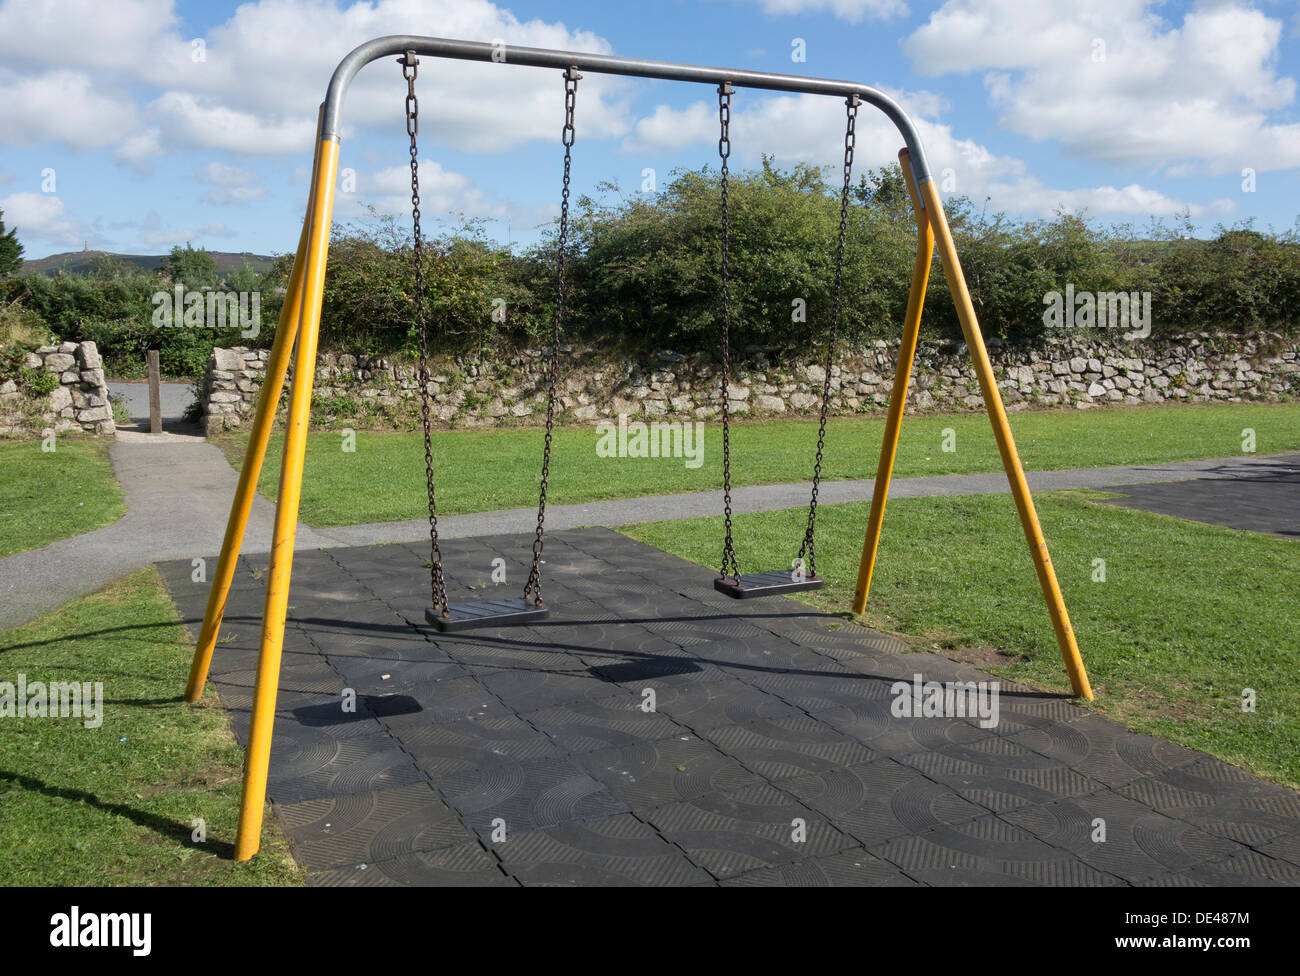 Children's swings in a play area. Stock Photo